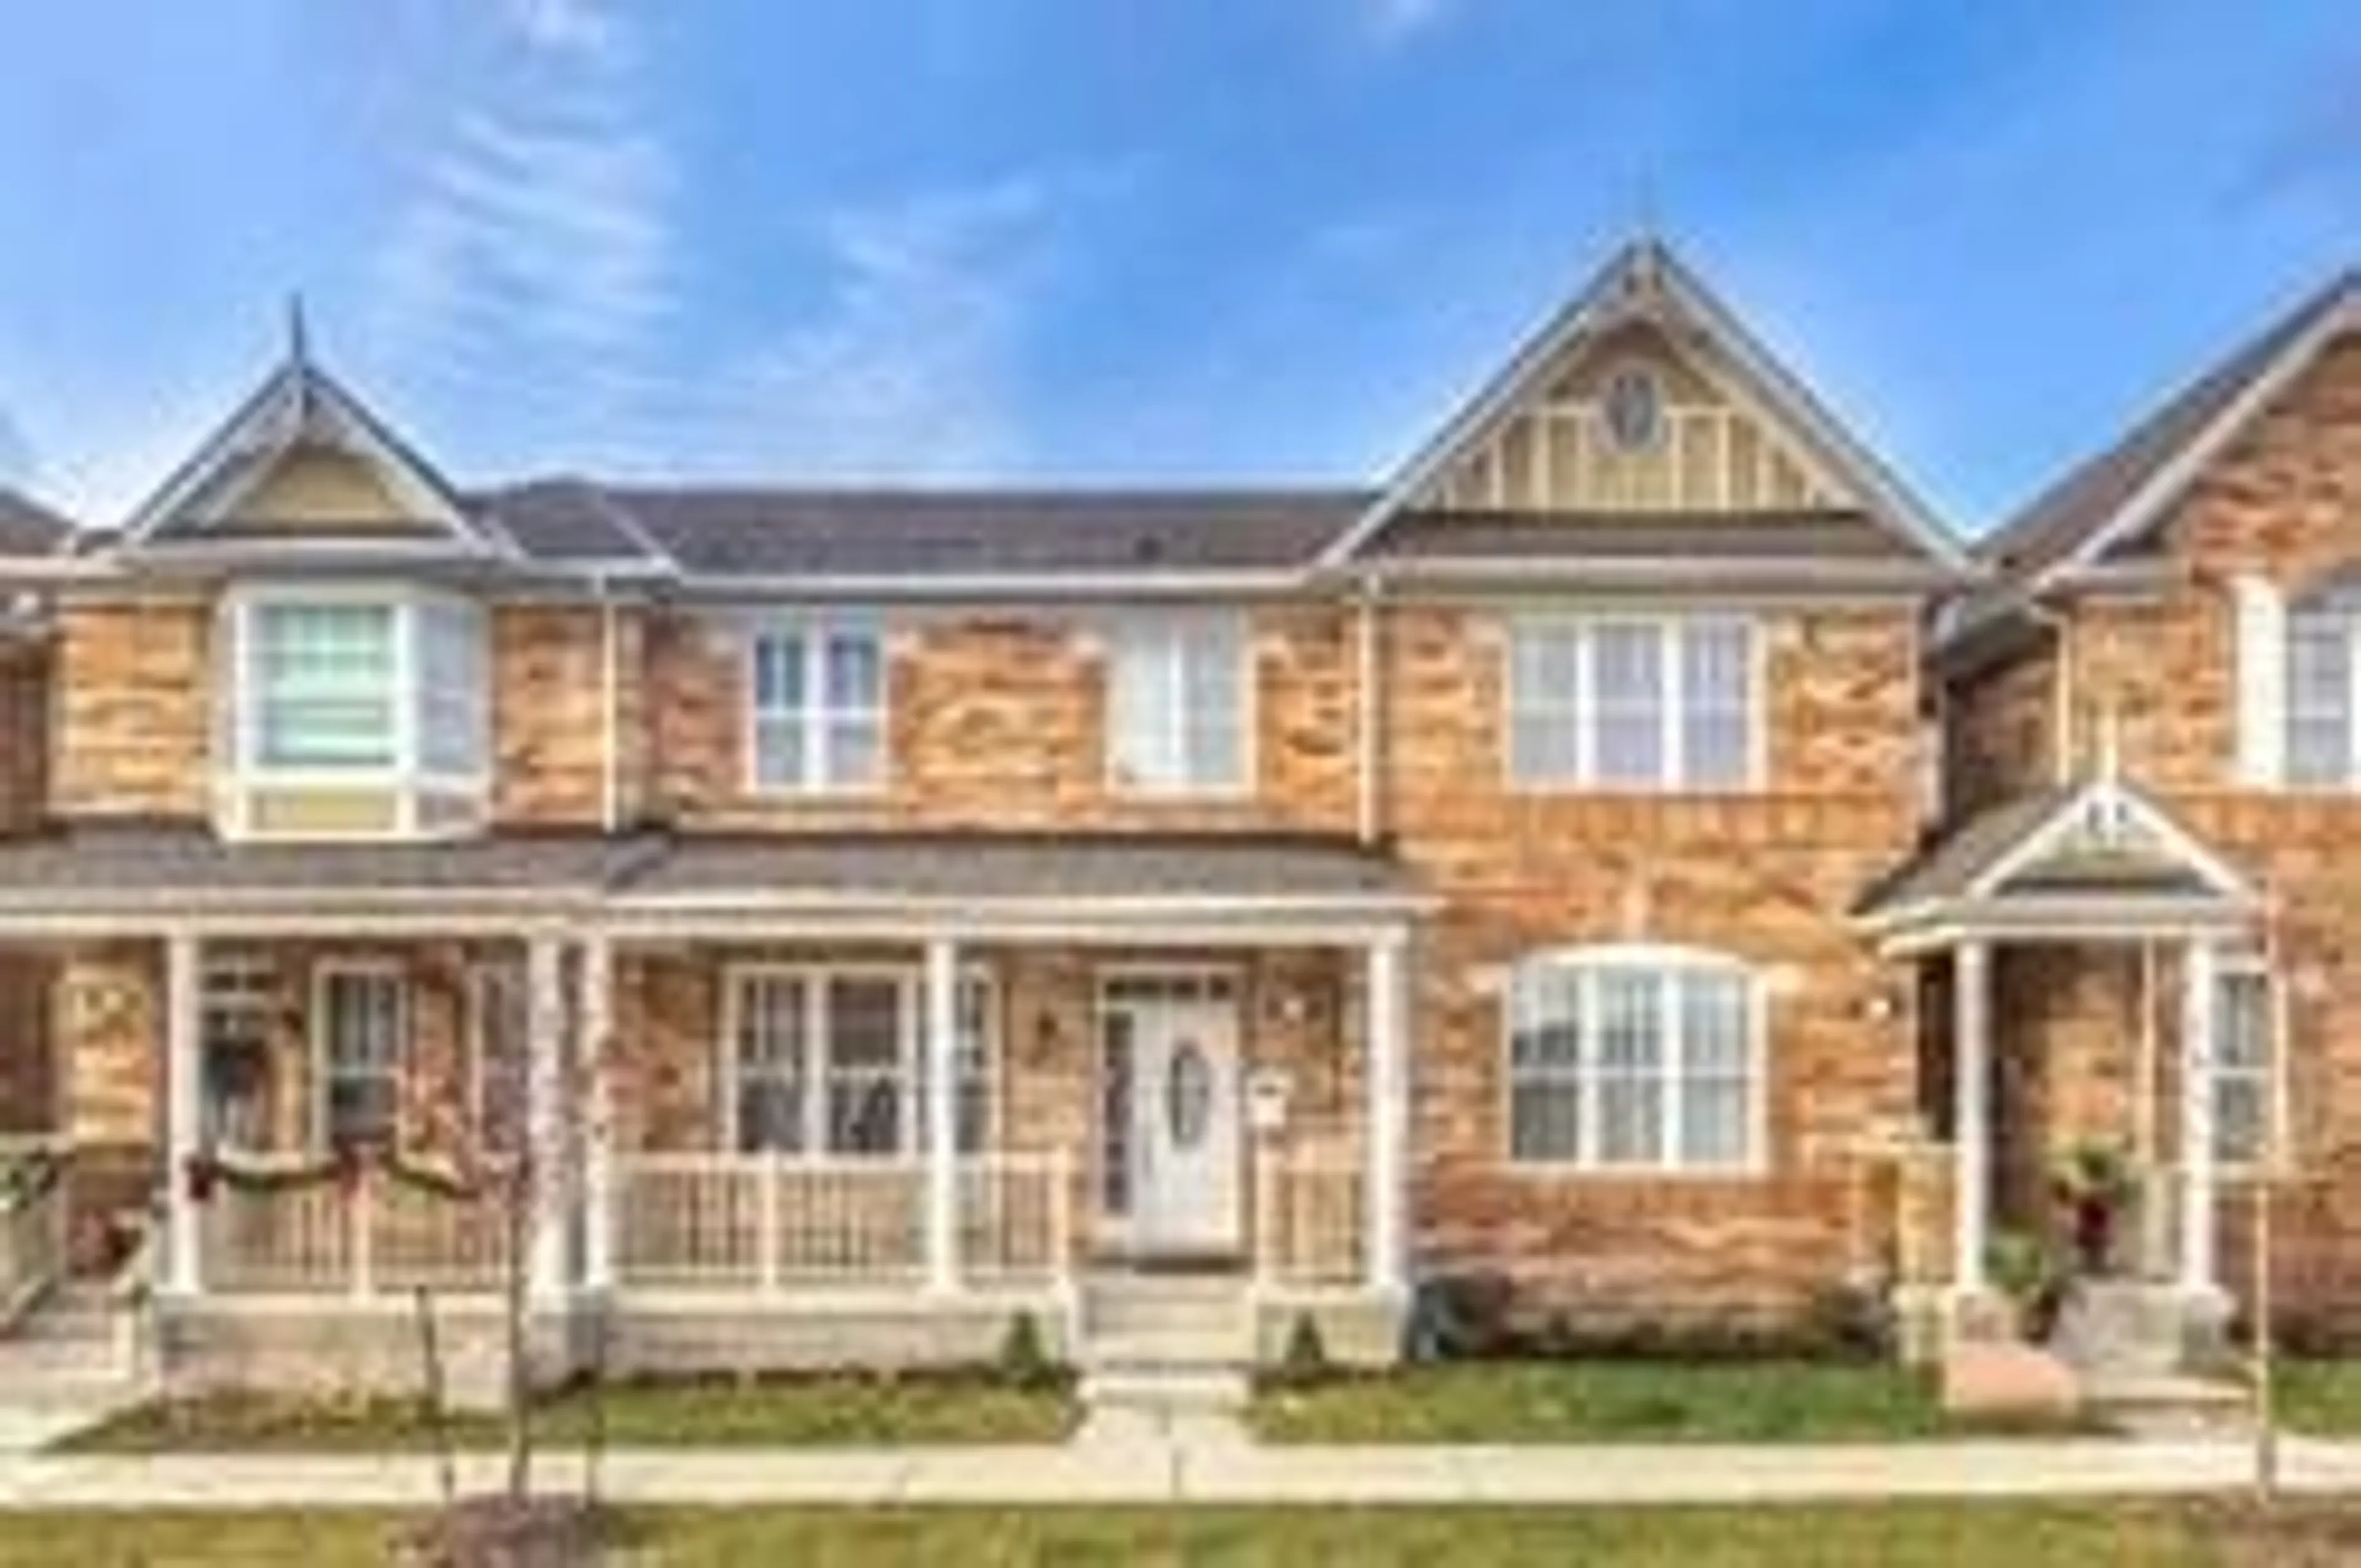 Home with brick exterior material for 30 Terry Fox St, Markham Ontario L6B 0W4